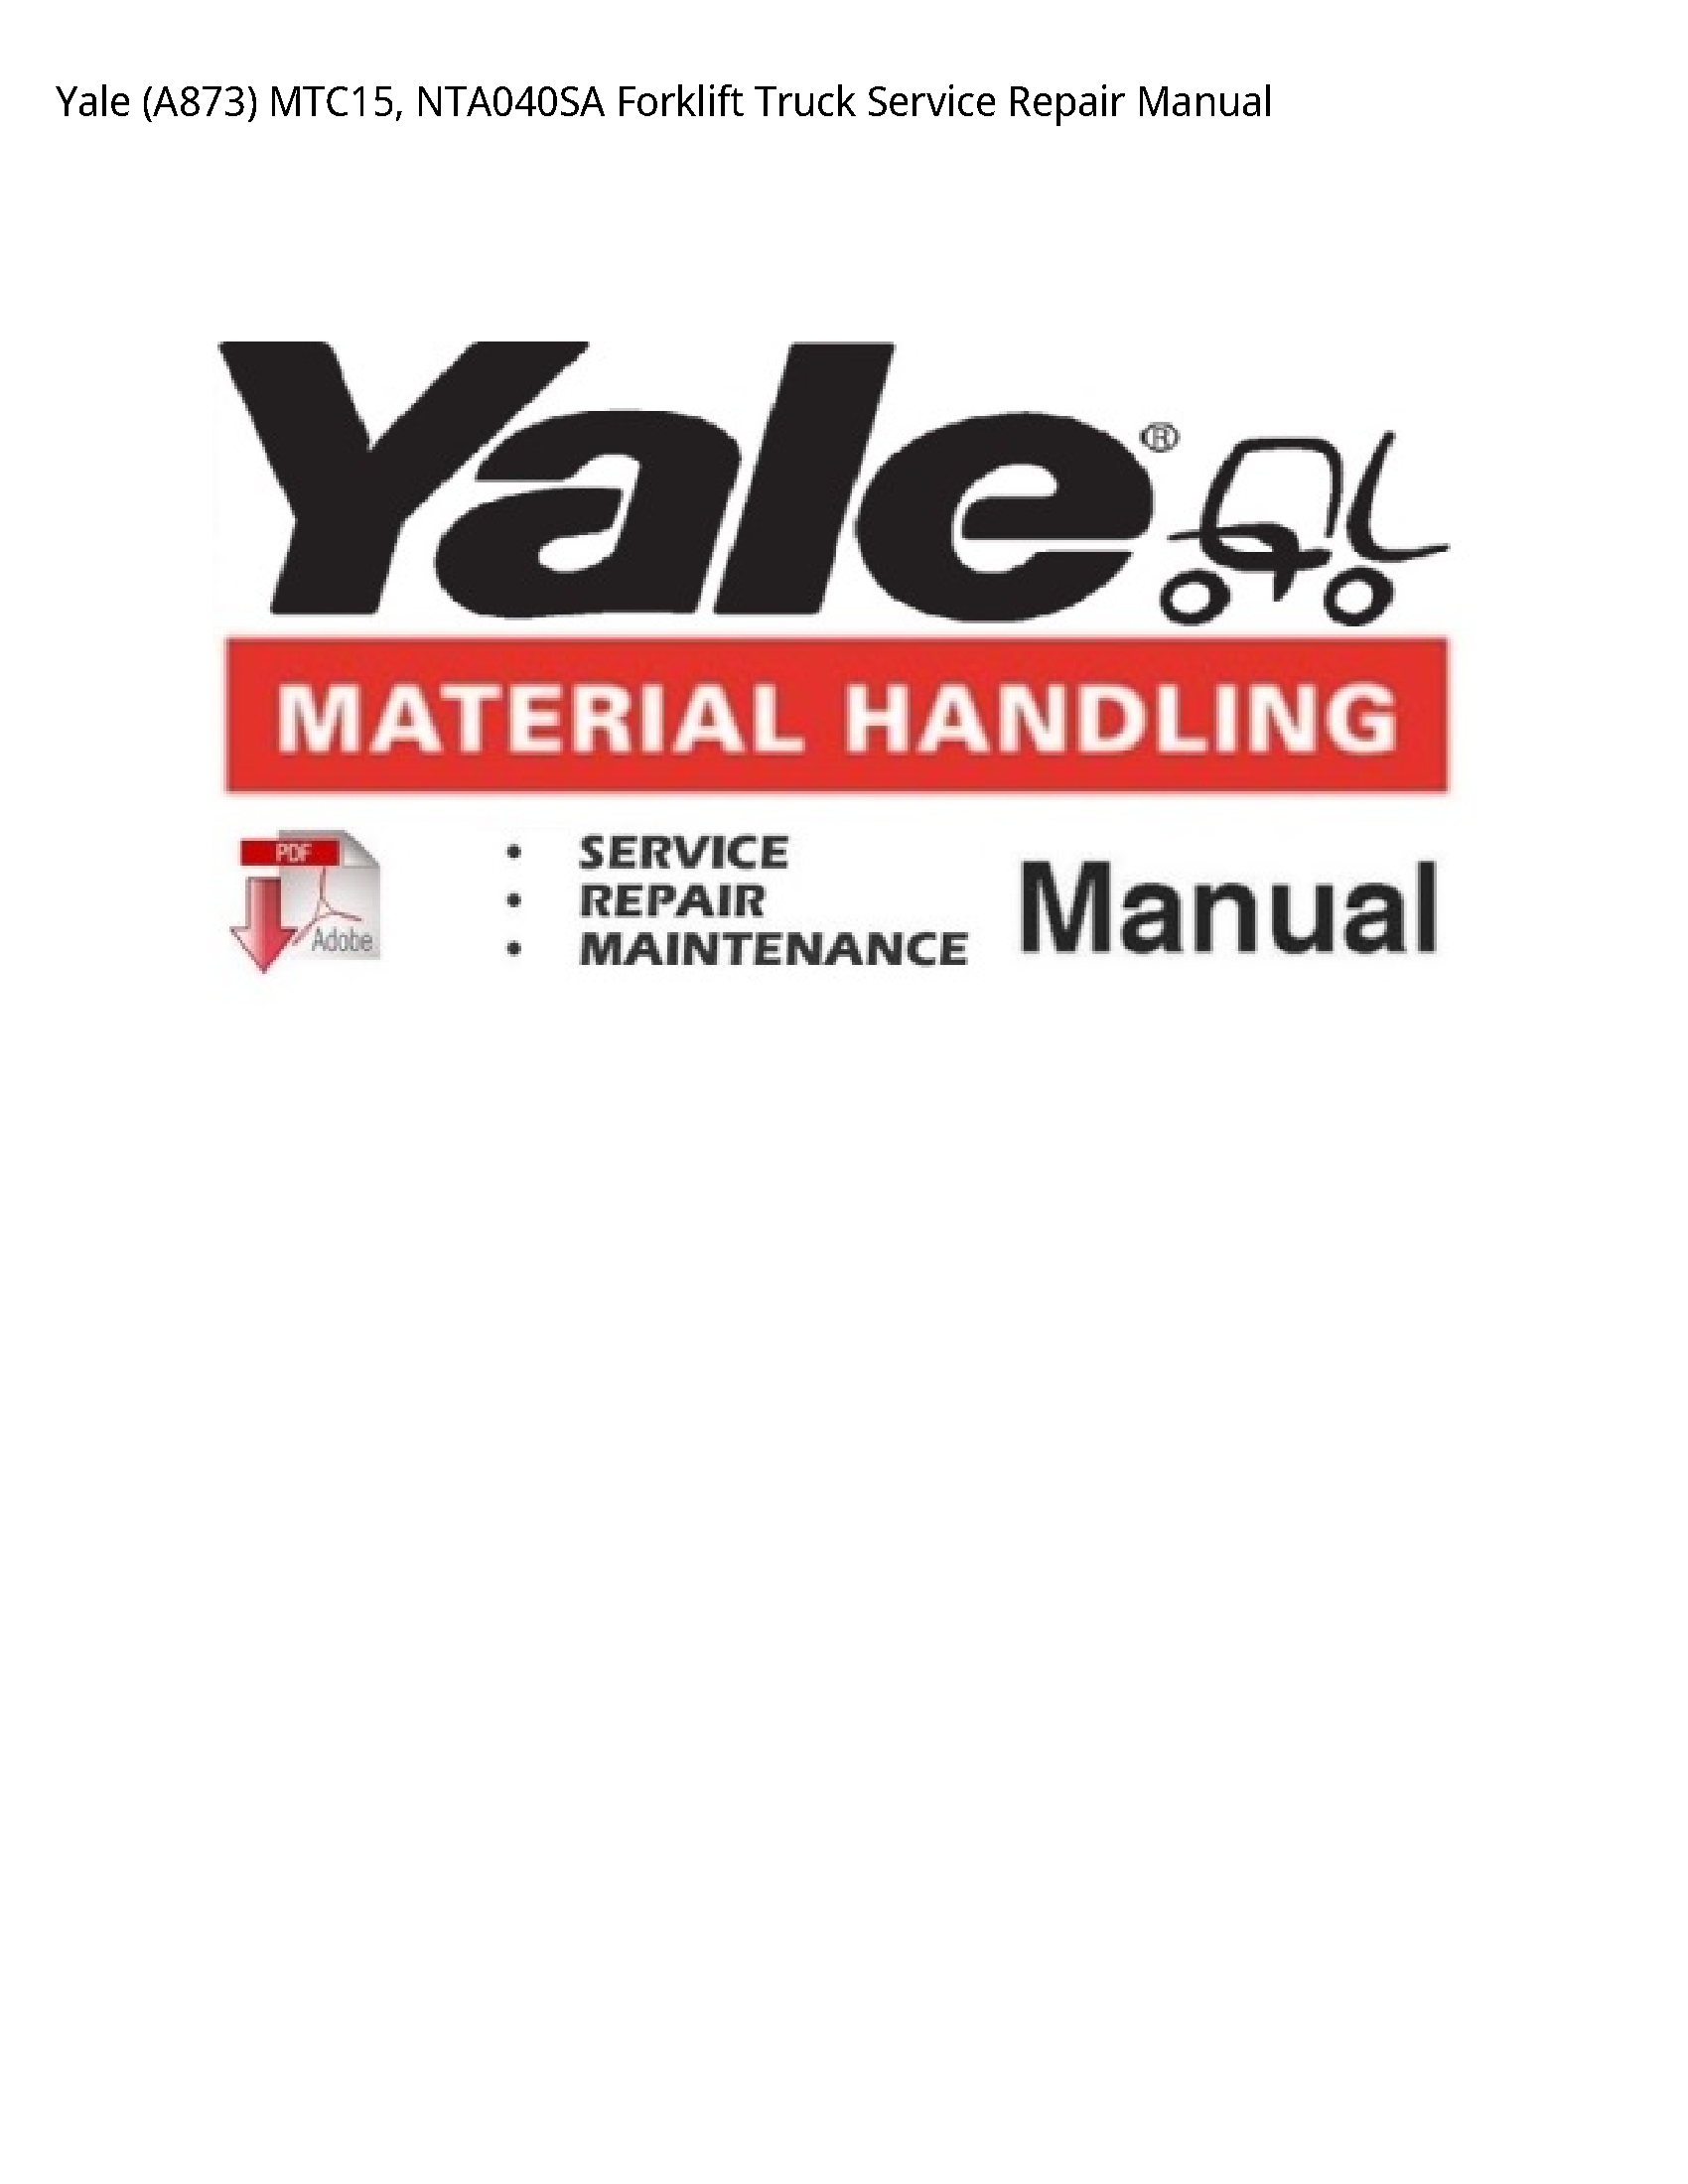 Yale (A873) Forklift Truck manual